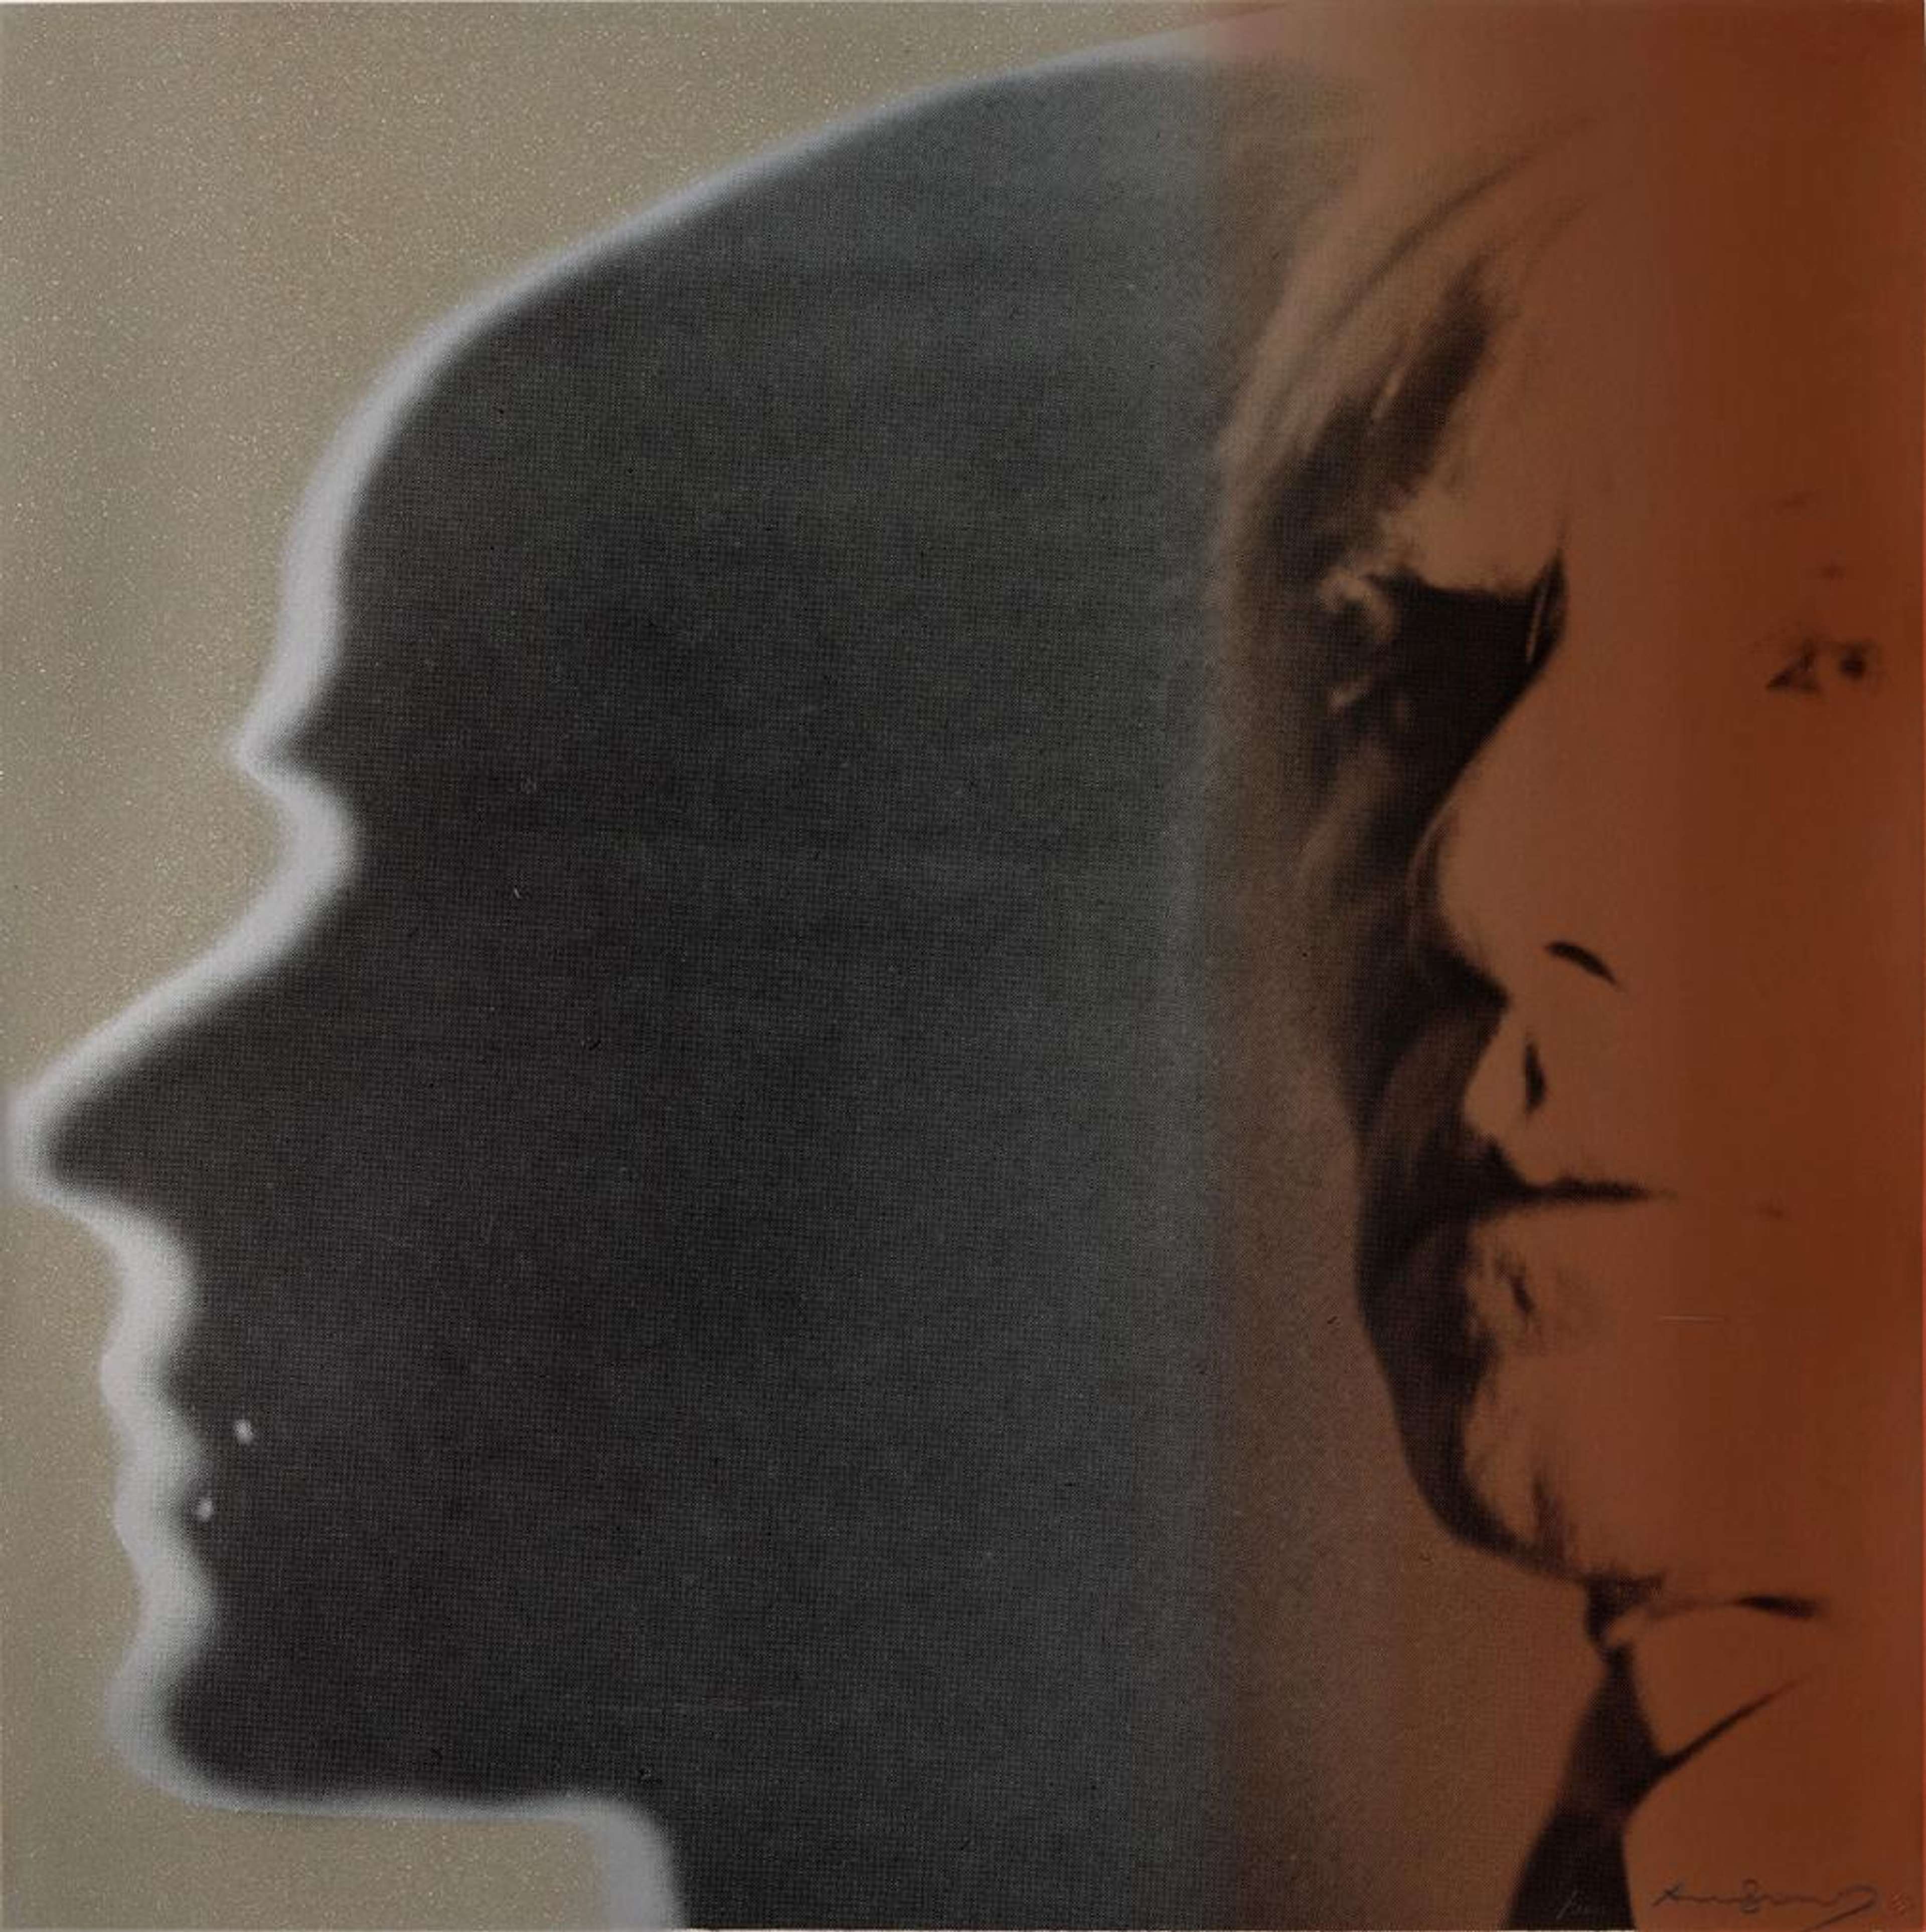 Warhol is rendered in a warm red and is captured staring out of the composition at the viewer. The portrait is unconventional as the sitter does not dominate the centre of the composition. Warhol appears standing to the right of the composition and is set against the silhouette of another person’s side profile. The dark, shadowy profile contrasts with Warhol’s red face and seems to lurk ominously behind him.